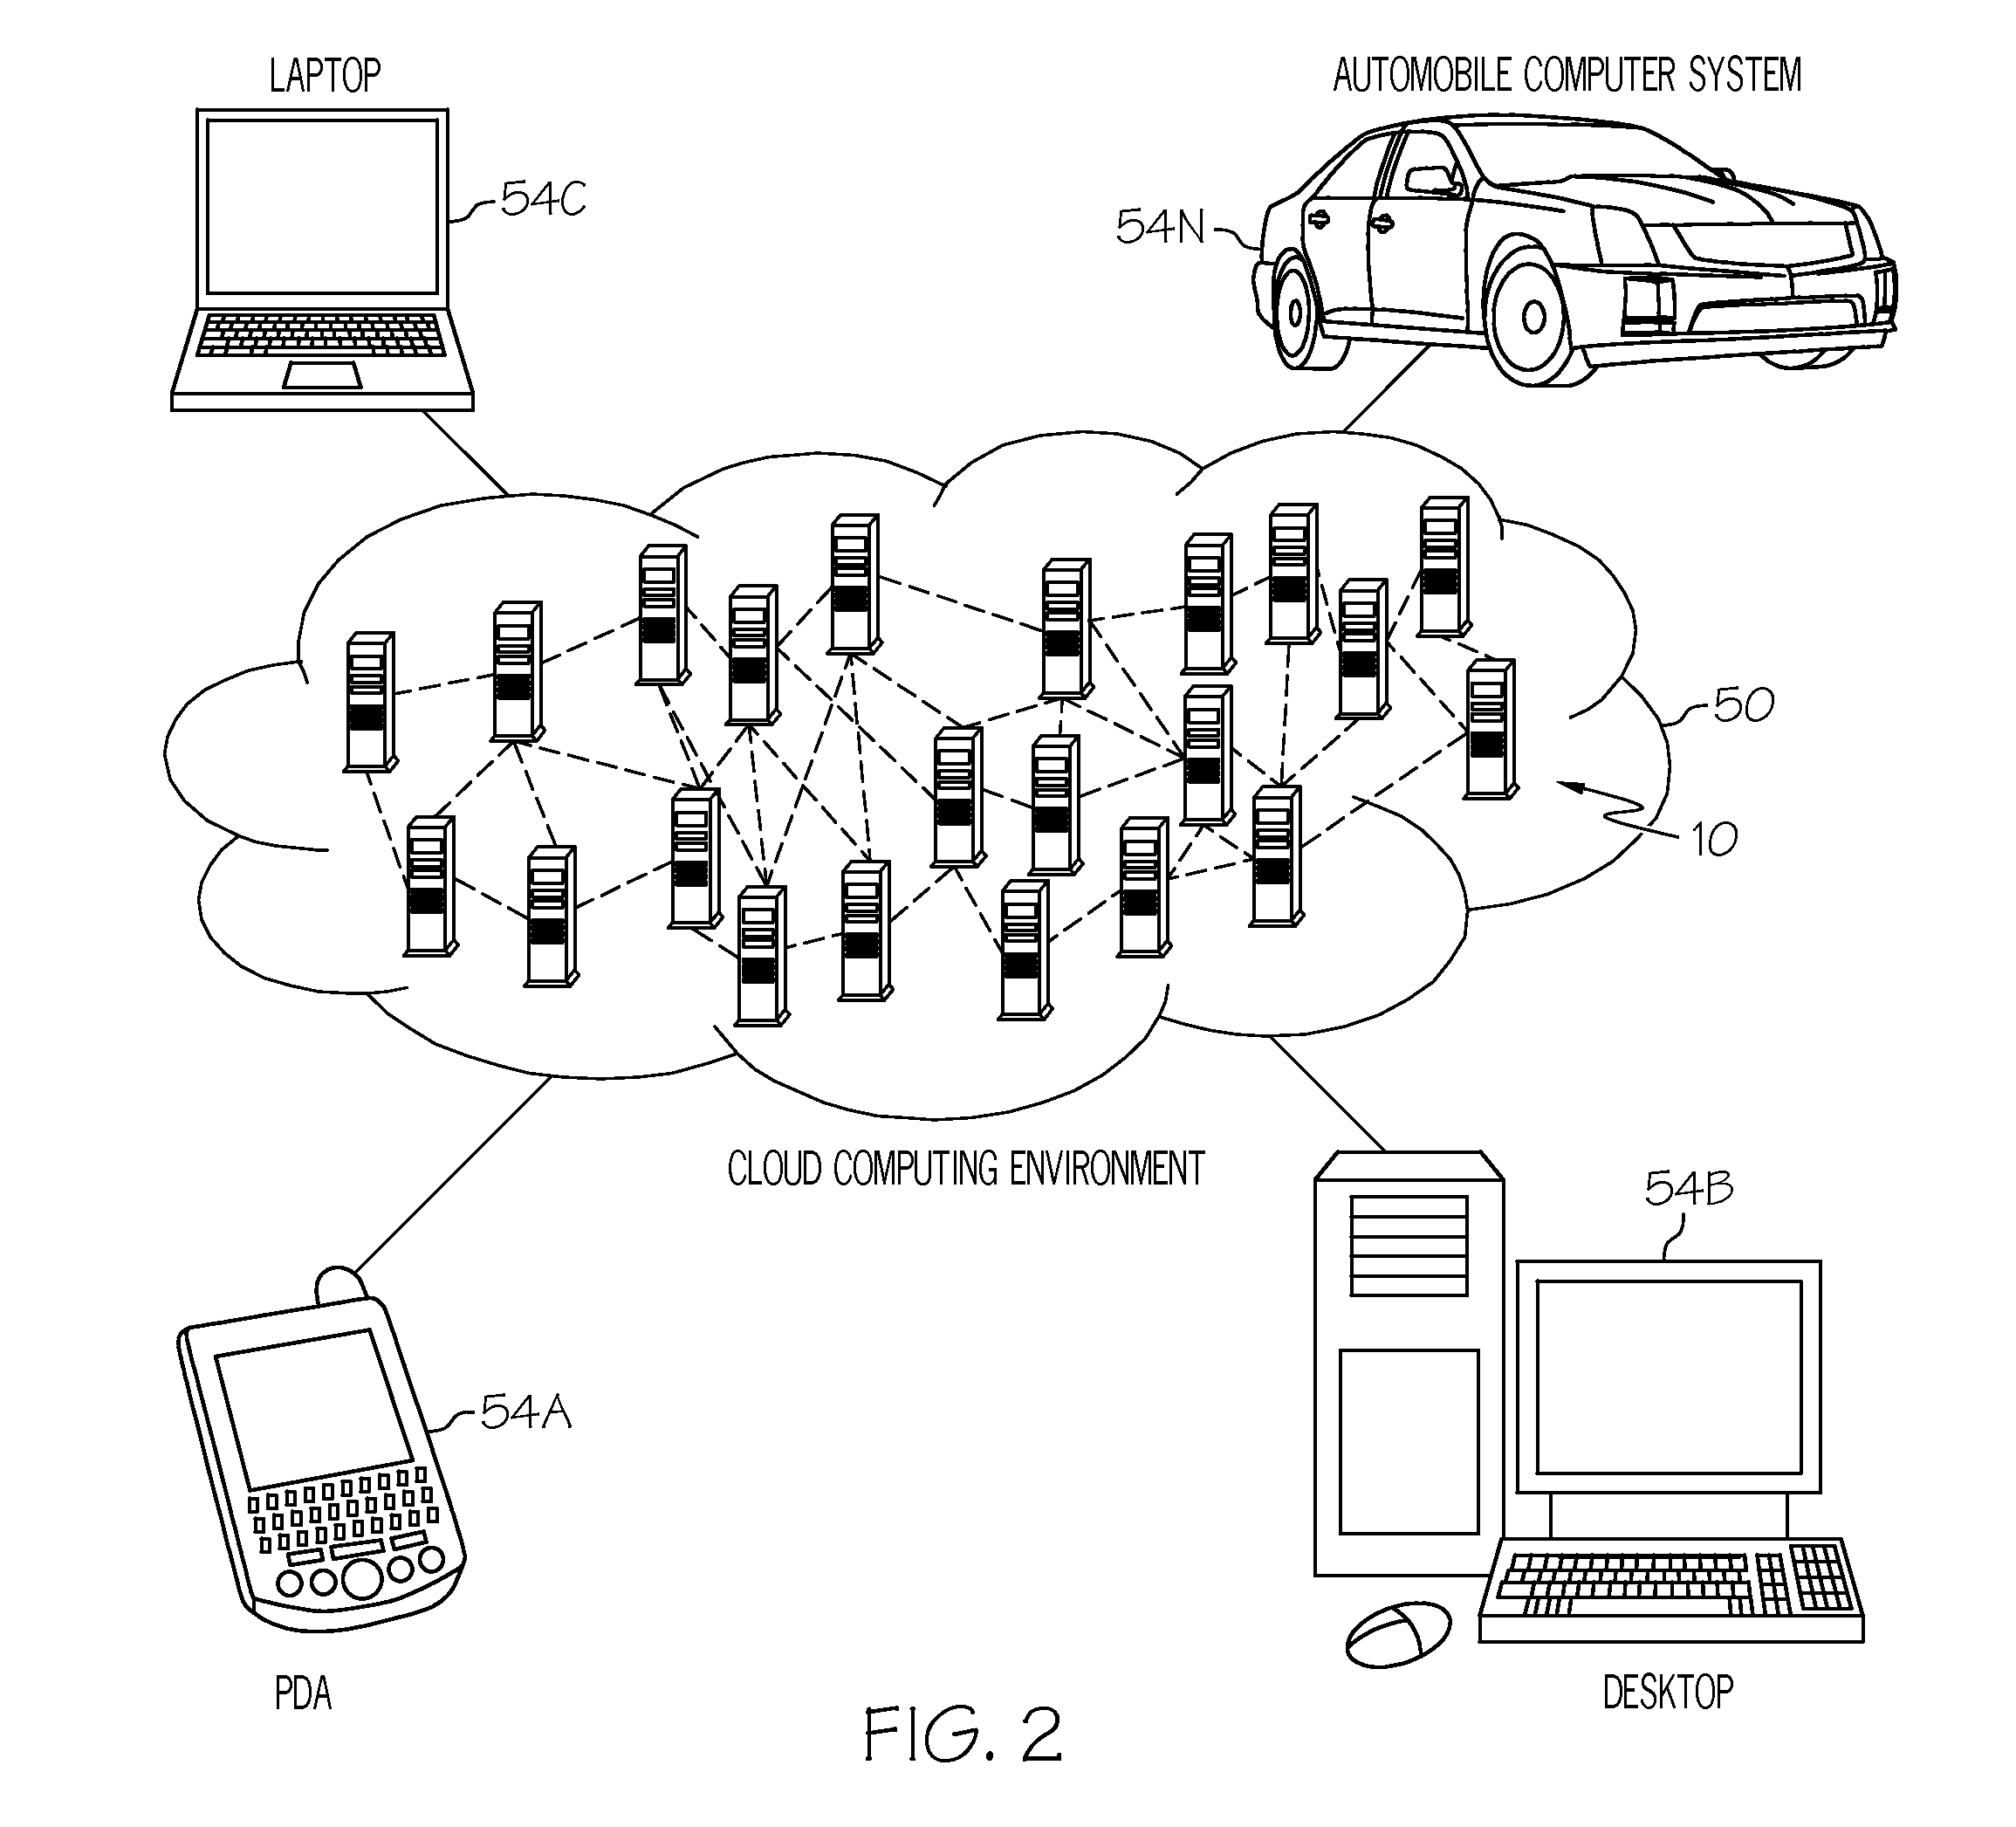 Inter-cloud resource sharing within a cloud computing environment